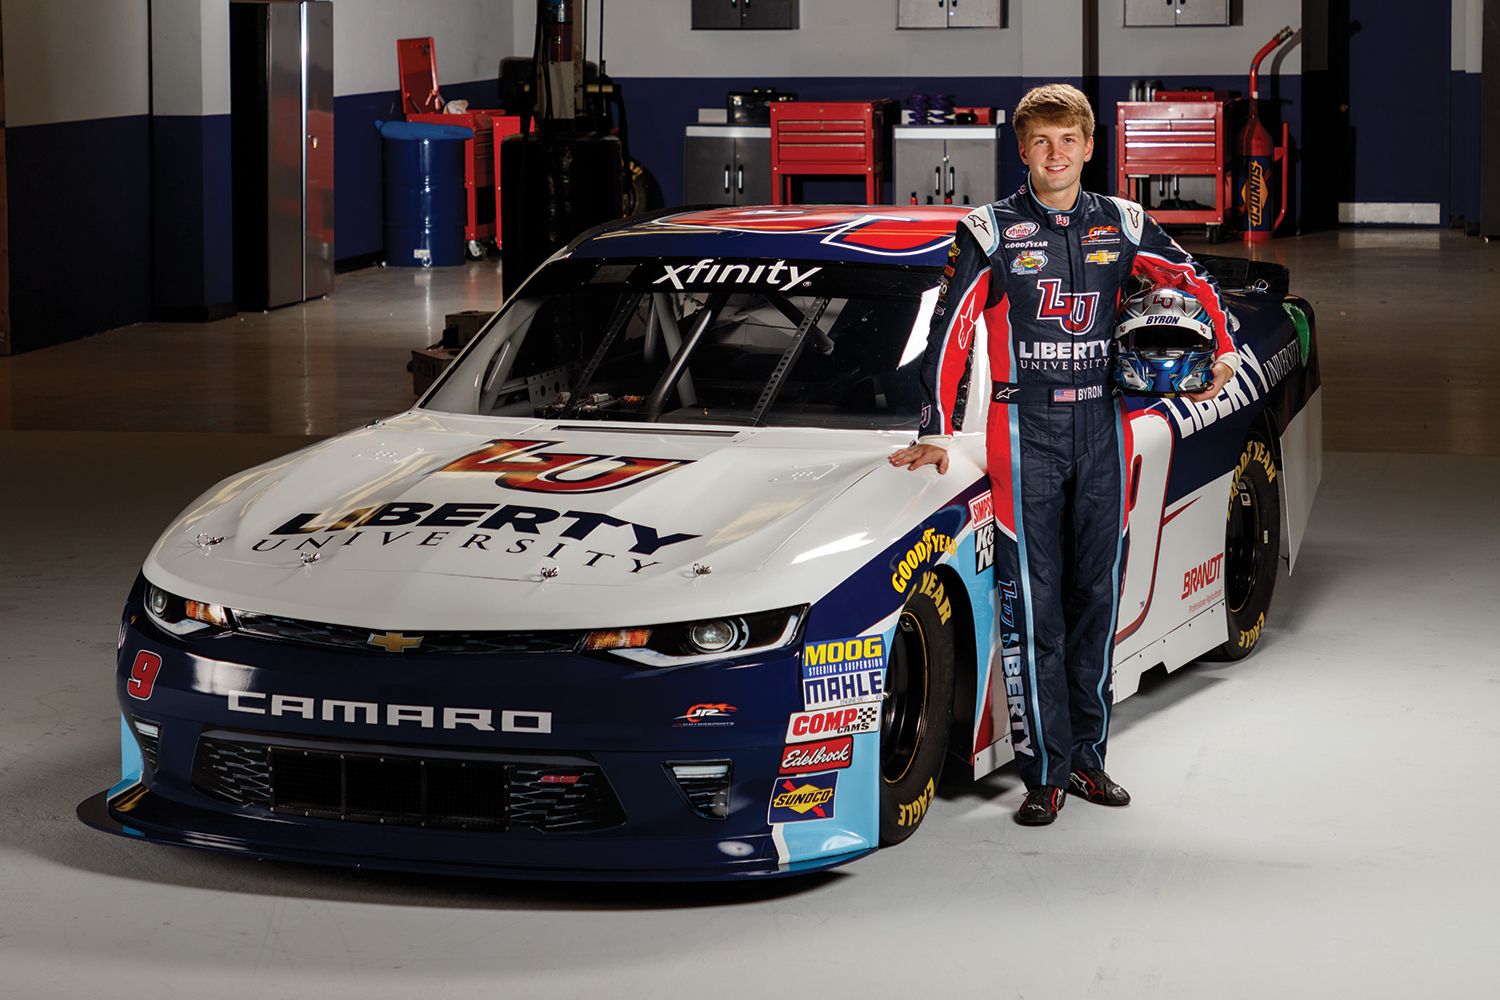 Liberty University freshman William Byron stands with the new Liberty University No. 9 Chevy Camaro he will drive during his rookie season with JR Motorsports (JRM) on the Xfinity Series.